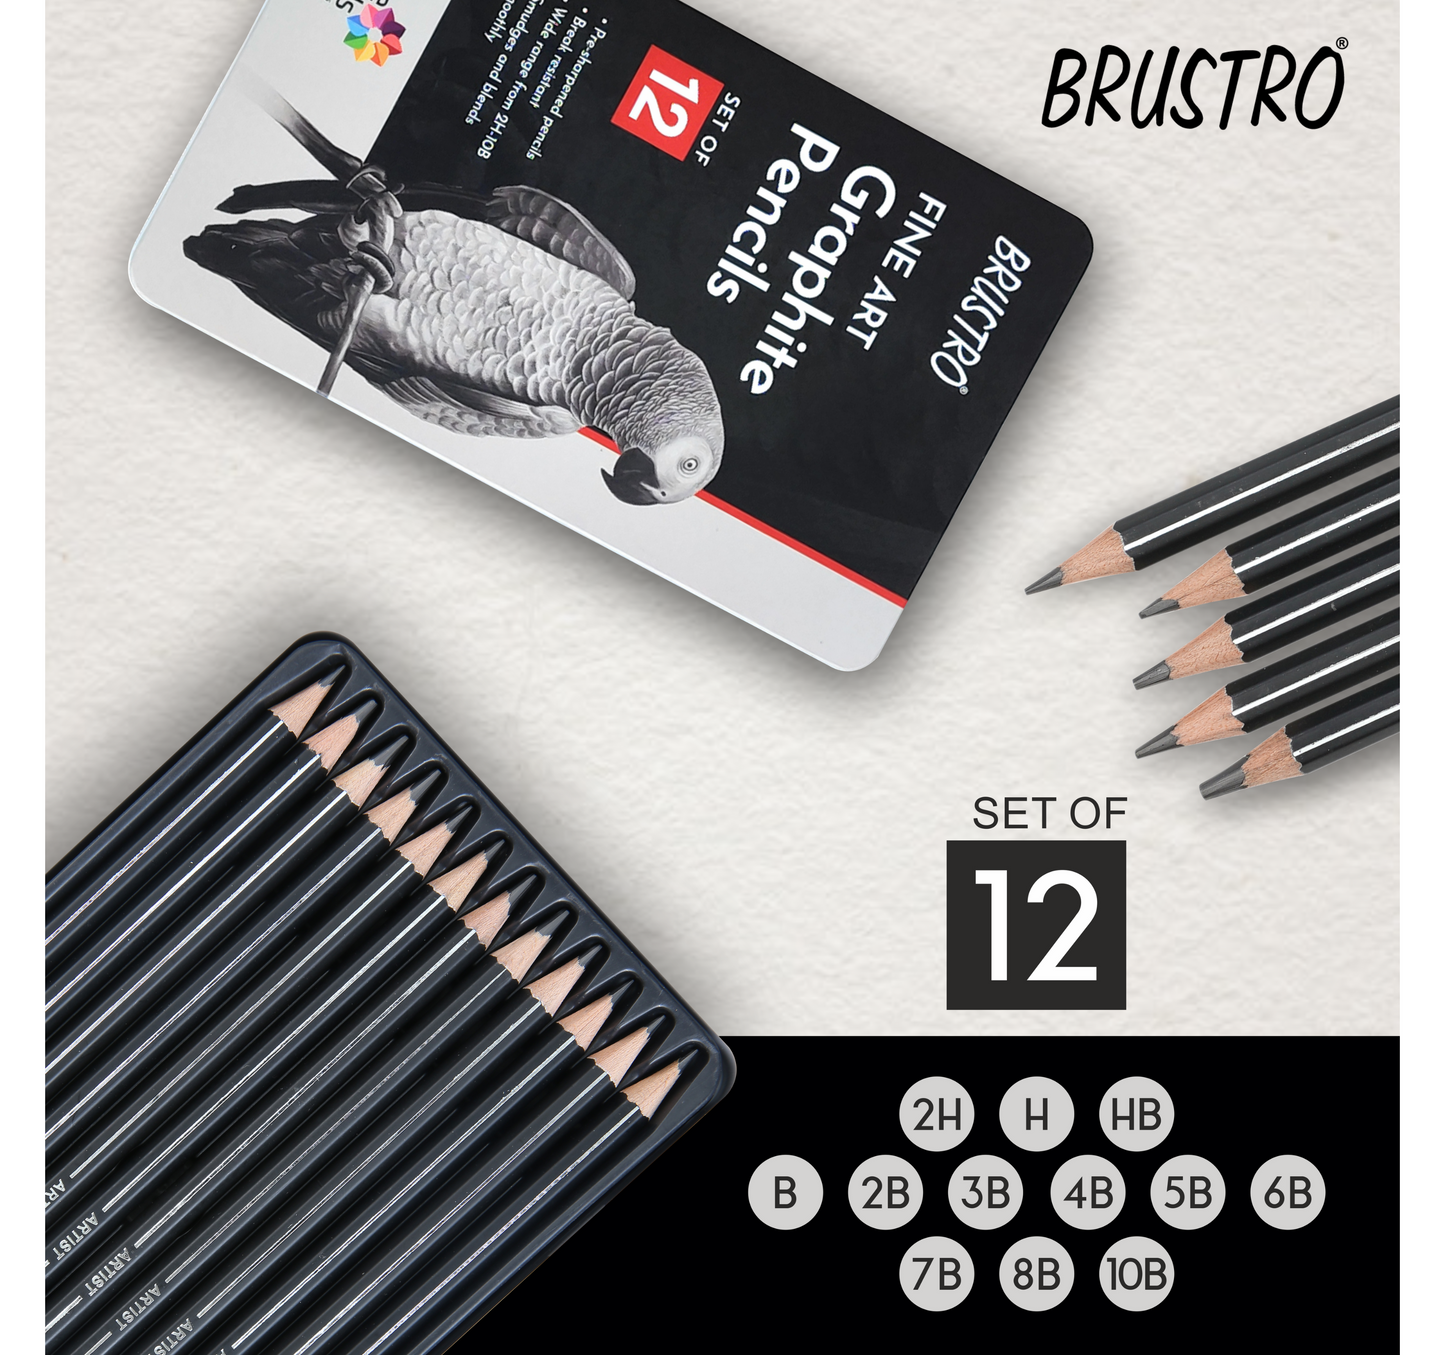 Brustro Artists’ Fineart Graphite Pencil Set of 12 (10B-2H) with 2 Brustro ECO-PVC Dust-free erasers and Brustro Pencil wrap (24 Slots) Canvas Roll Up Carry Case